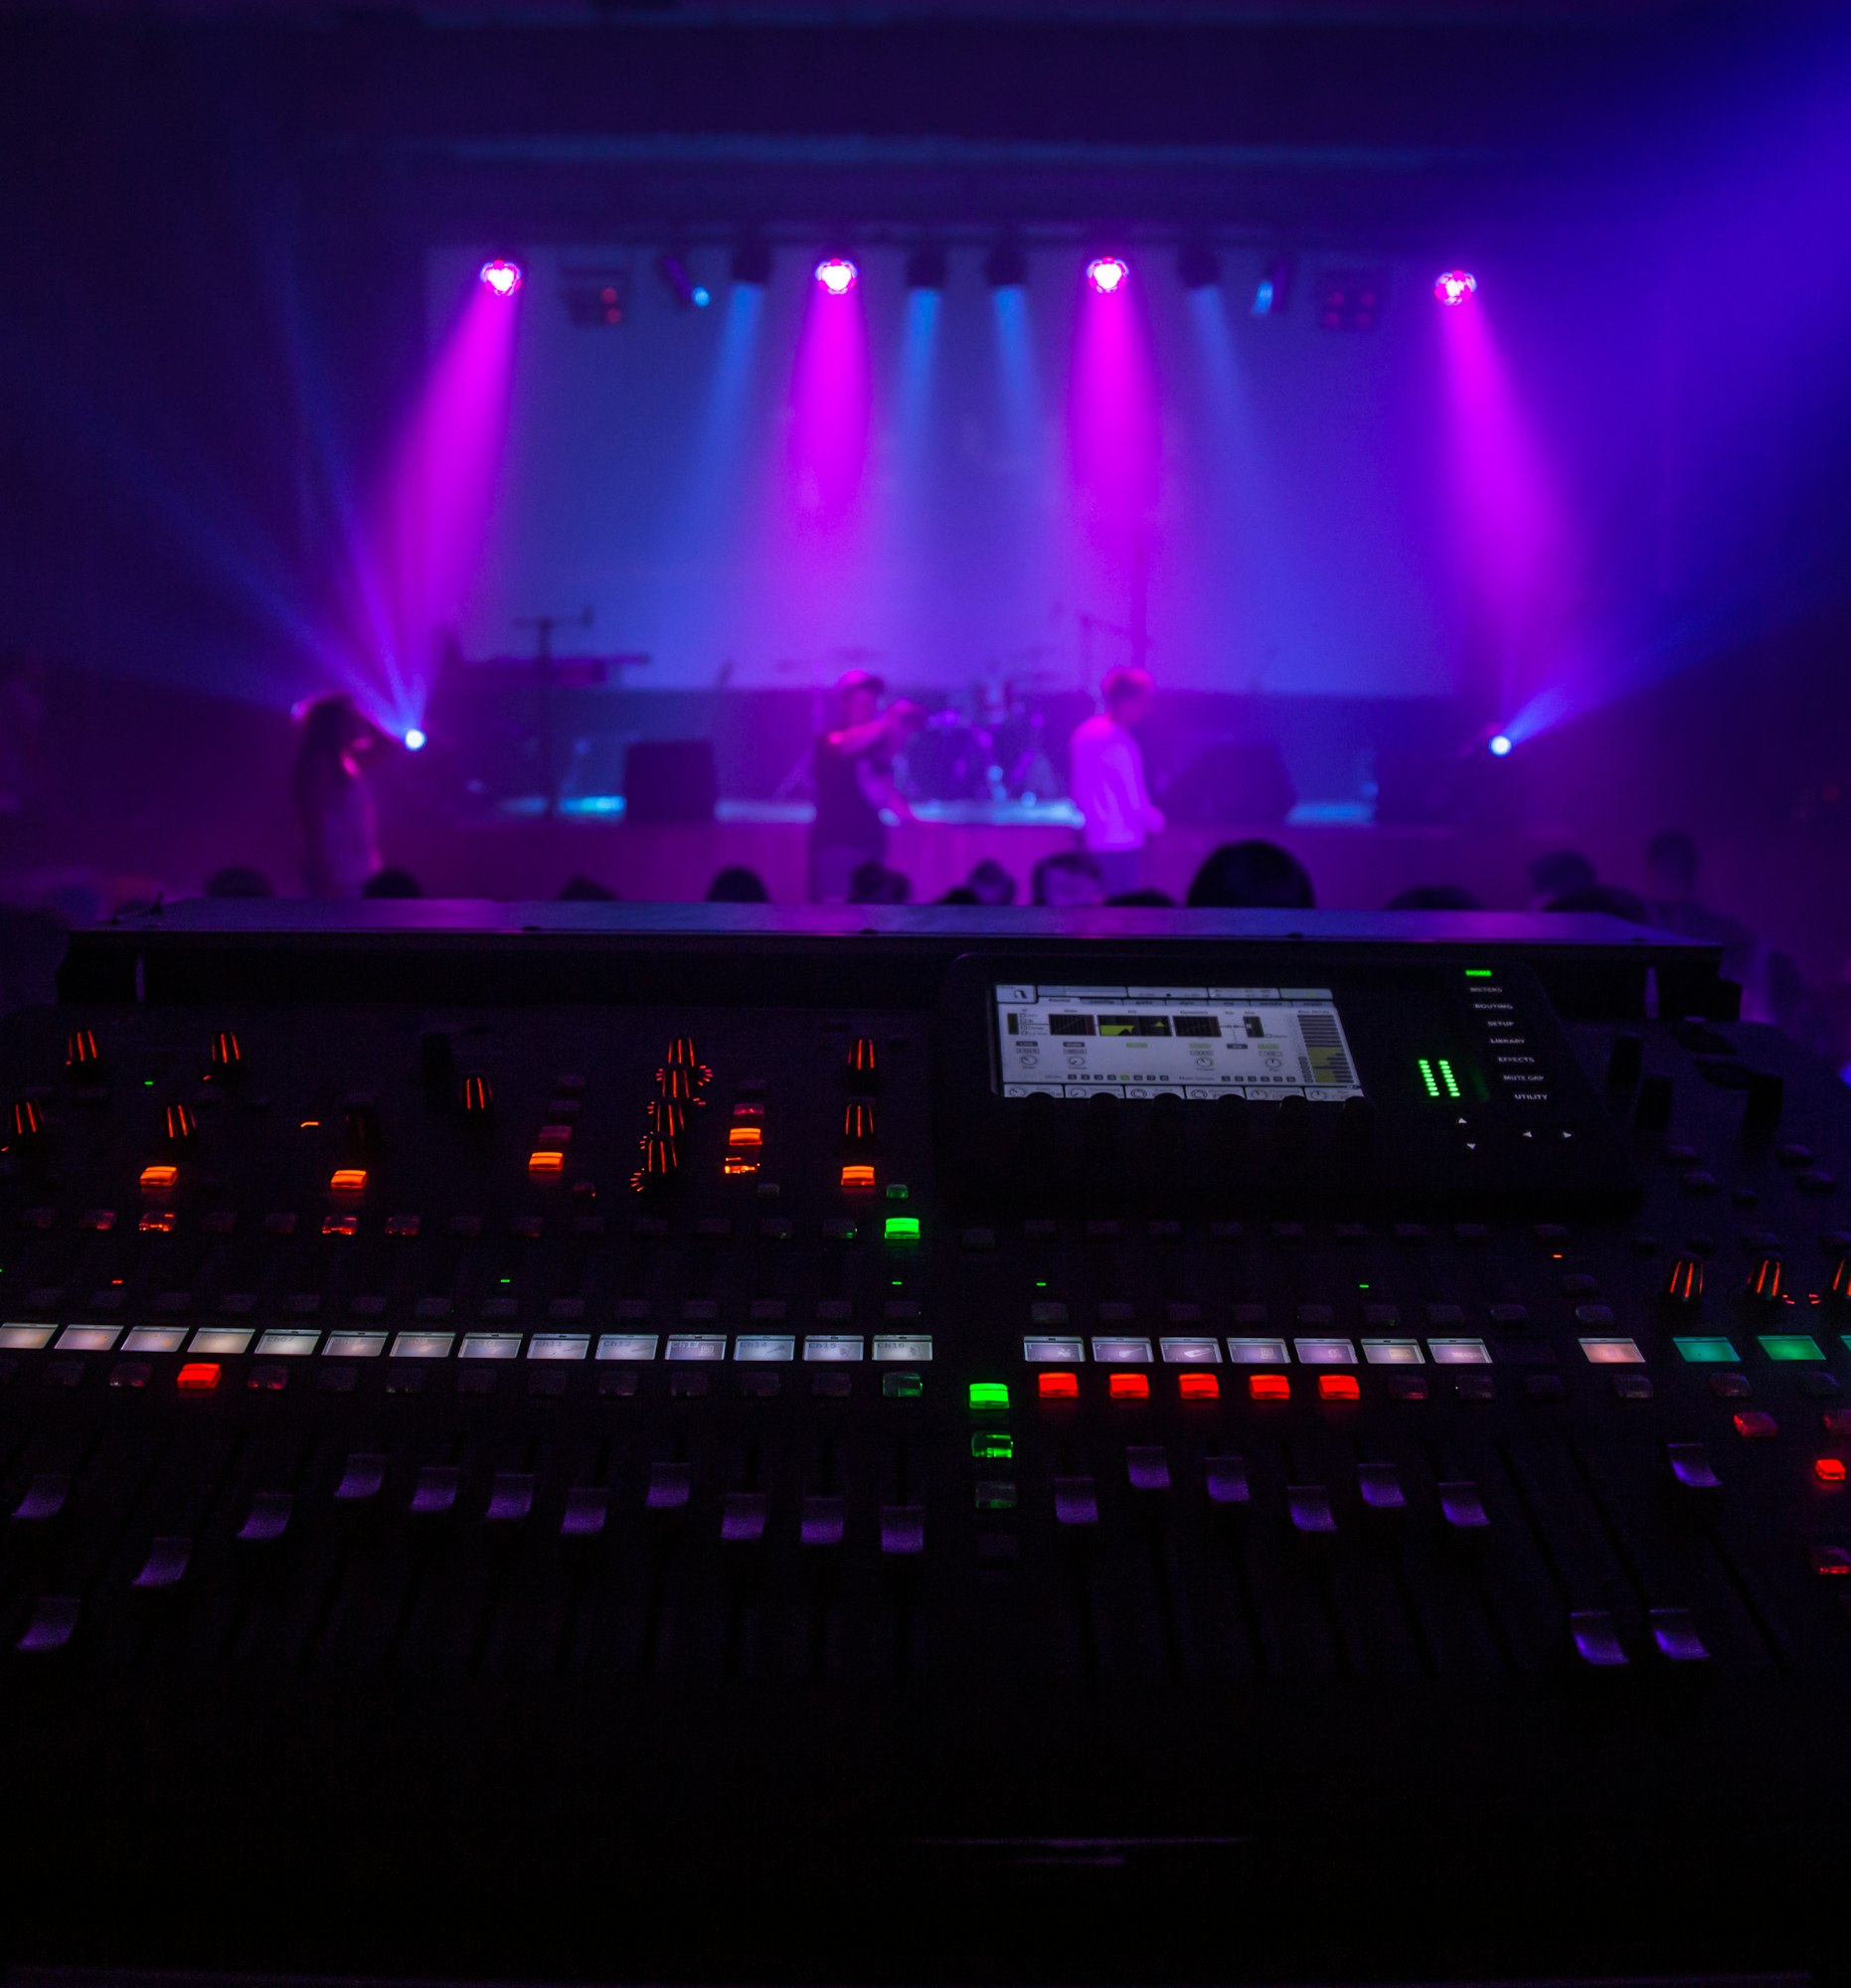 digital mixing console as a concert